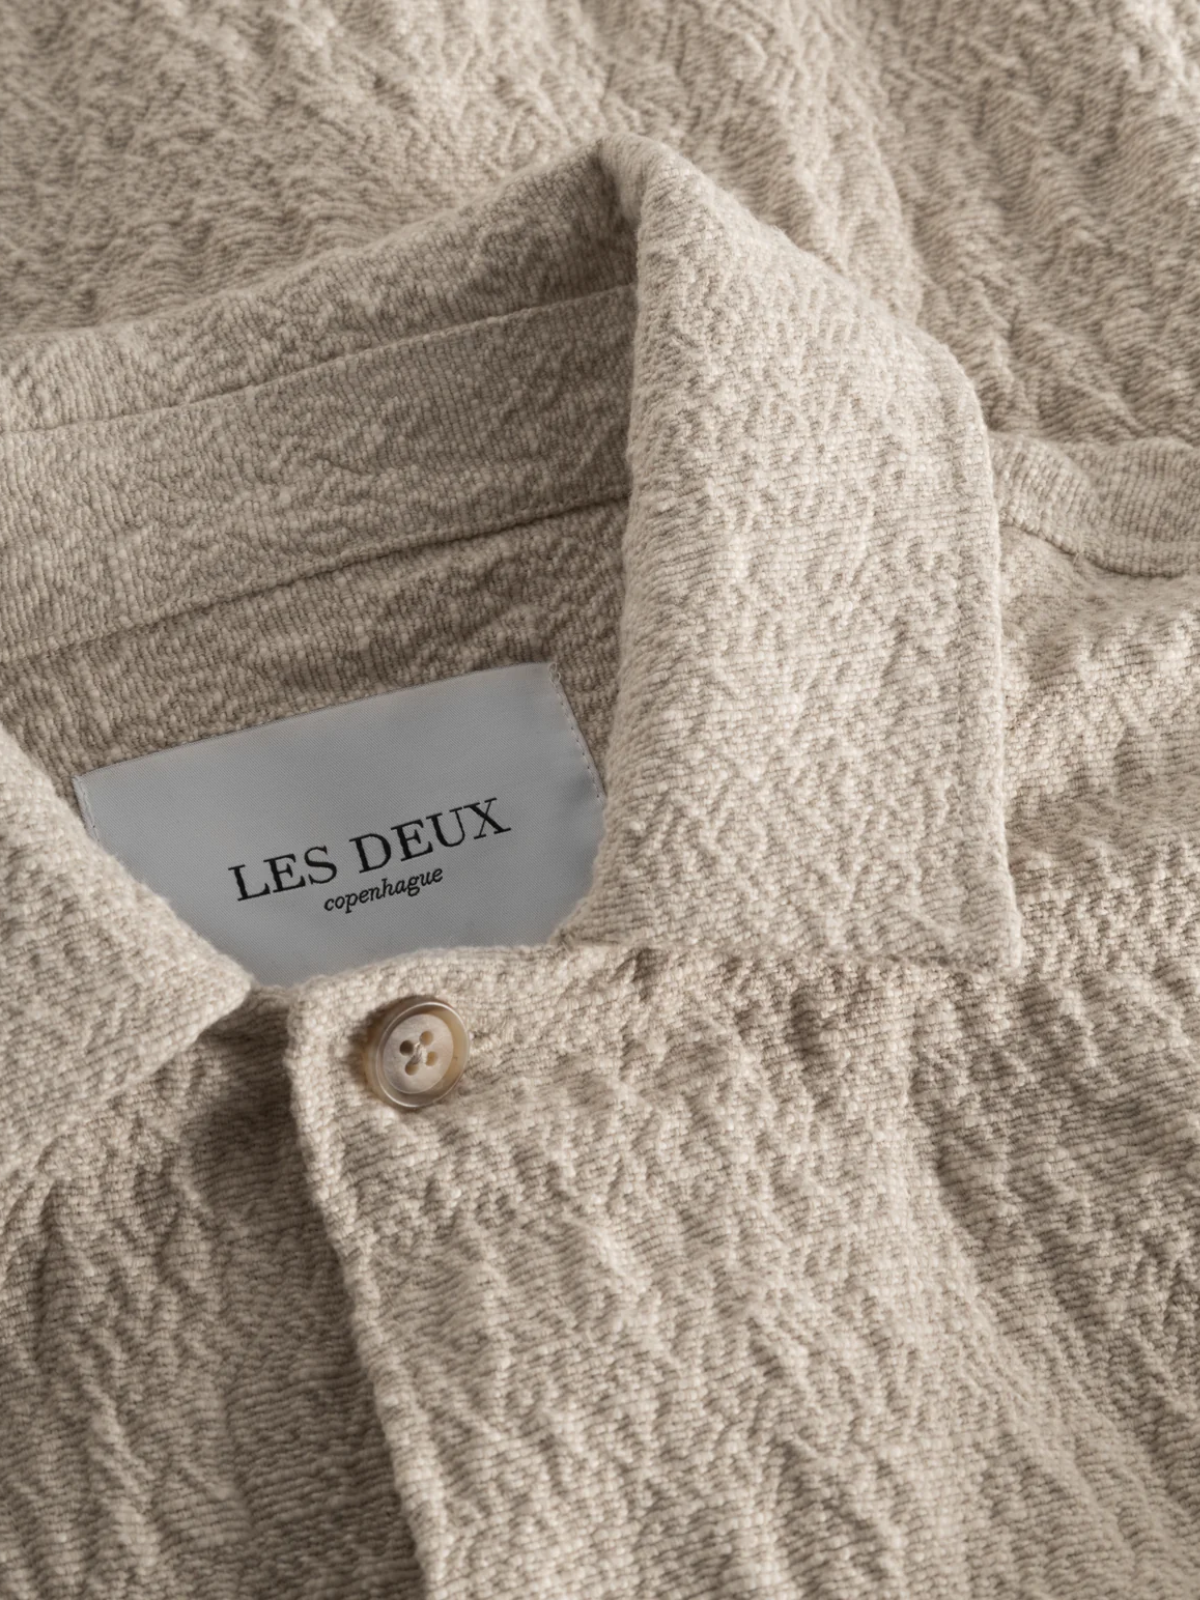 les deux isaac overshirt ivory cream recycled cotton polyester blend formal chore coat jacket kempt athens ga georgia men's clothing store